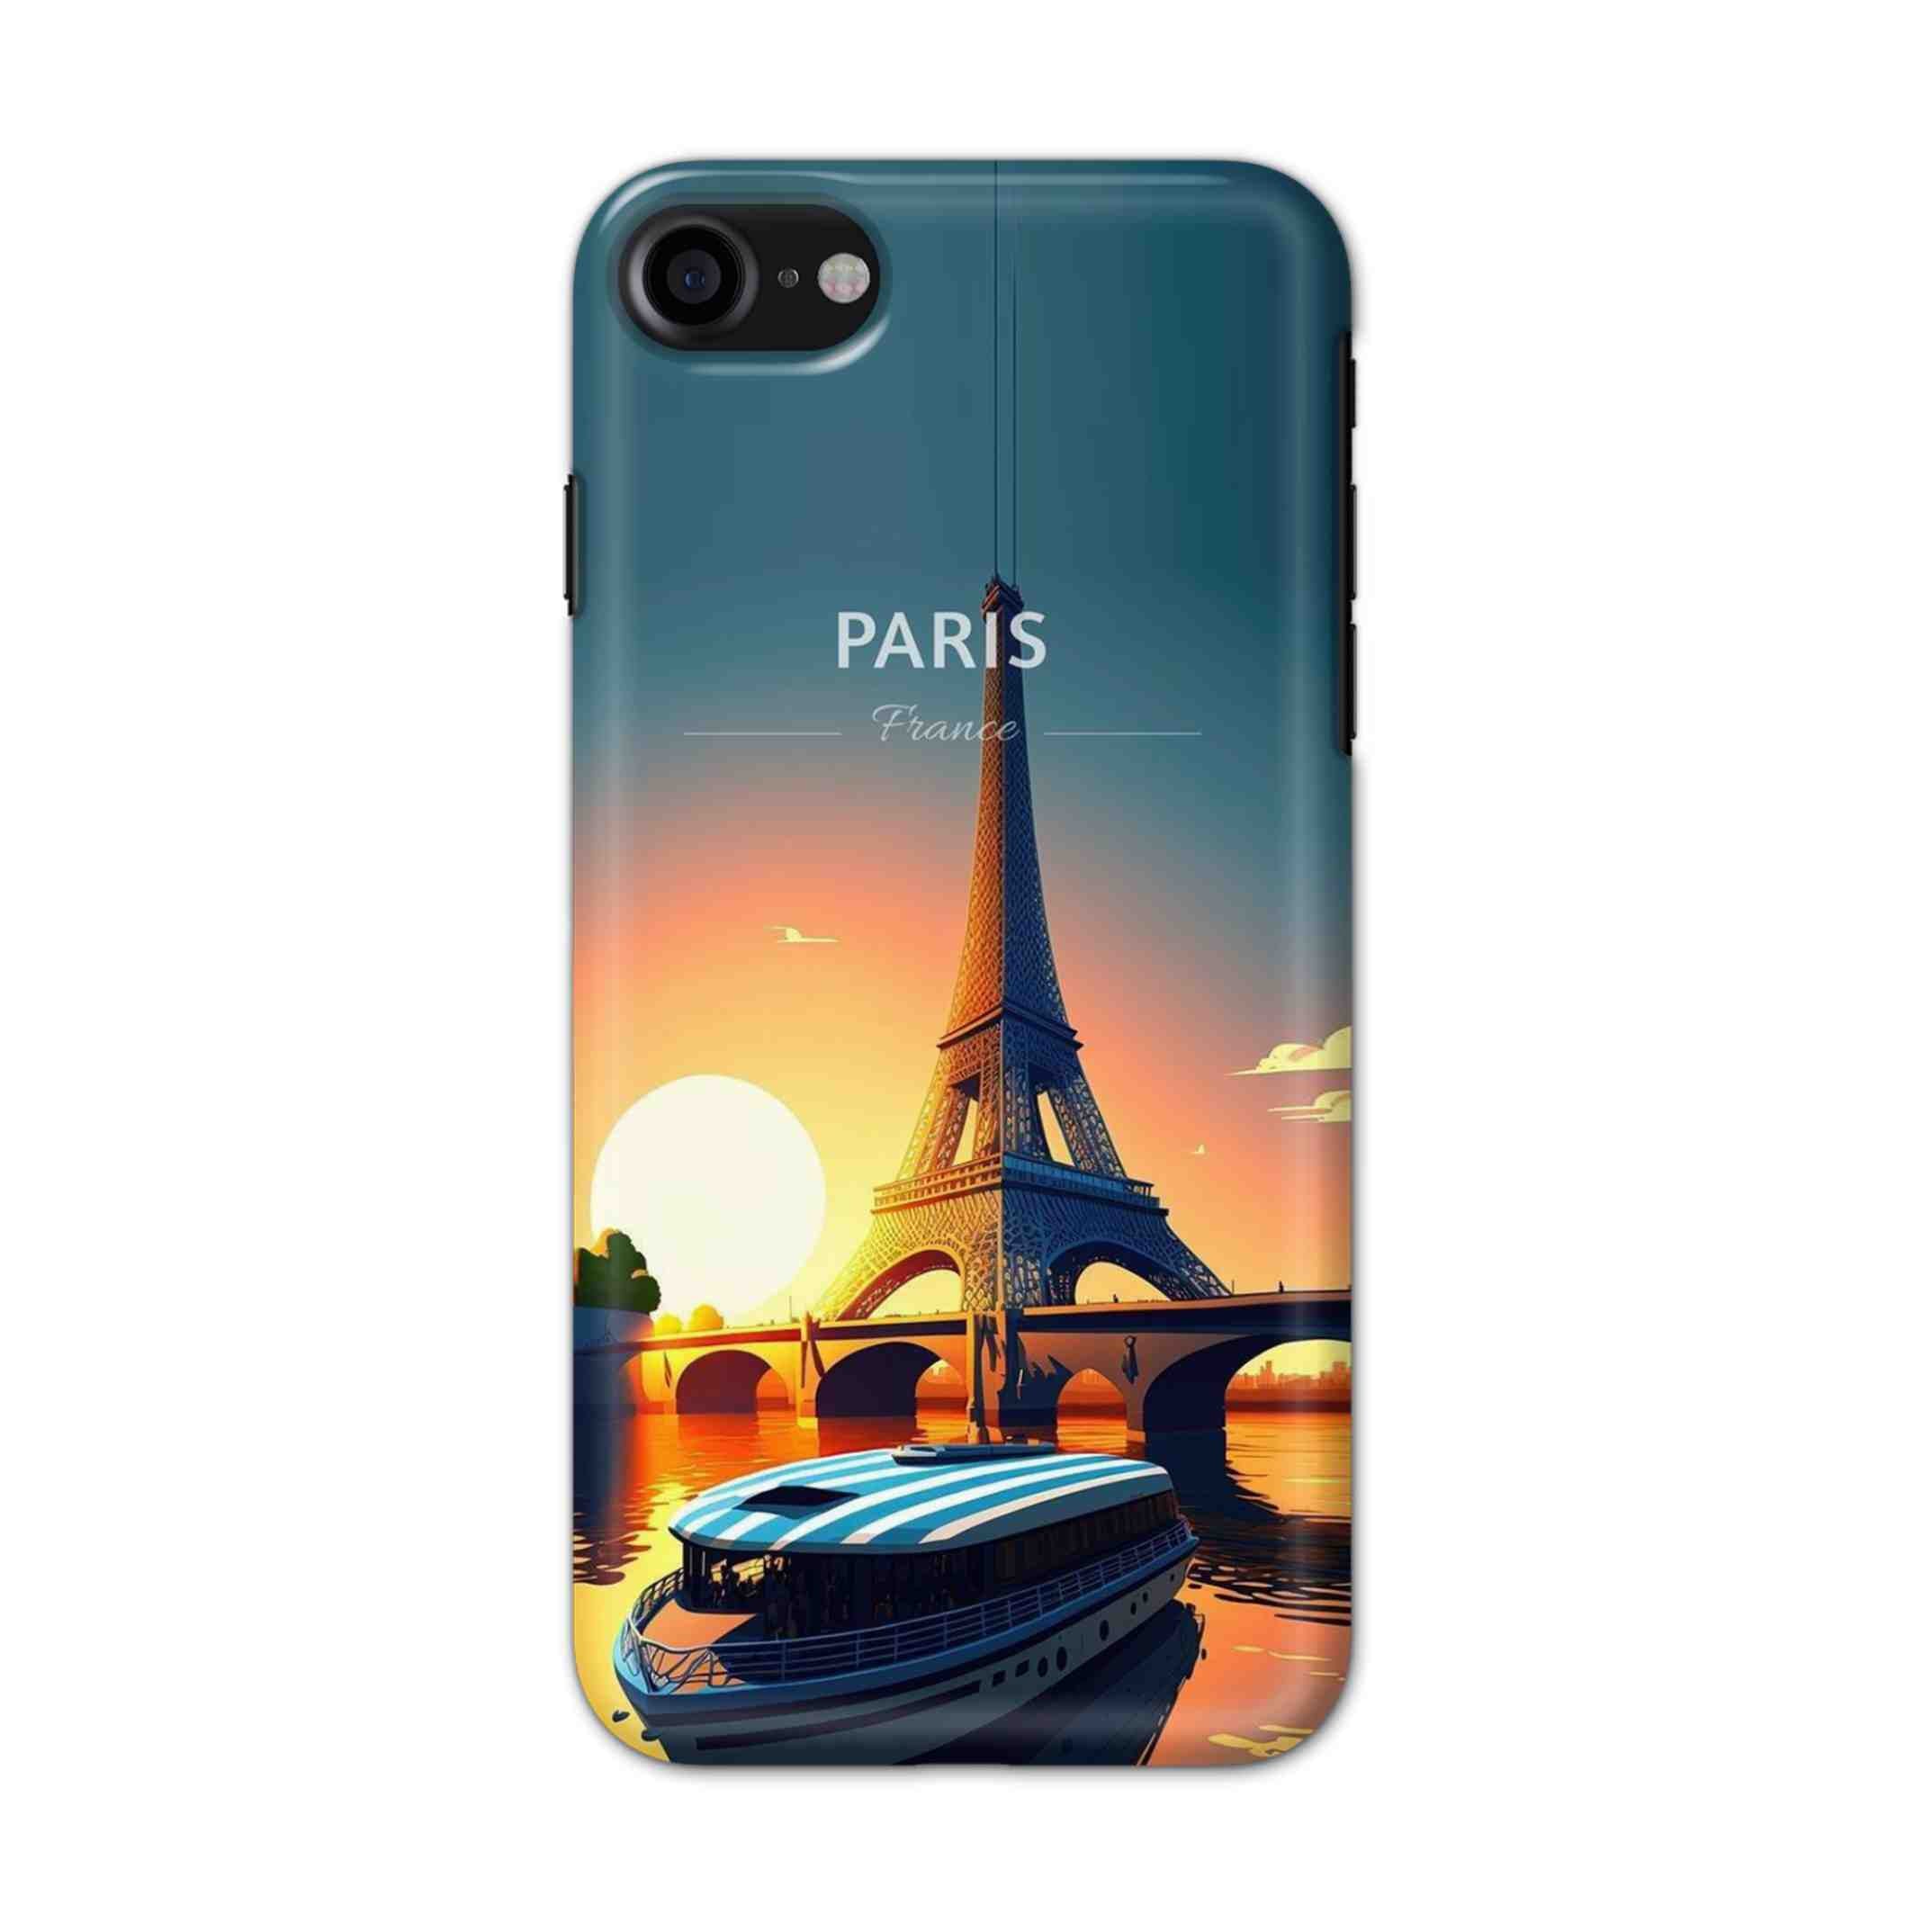 Buy France Hard Back Mobile Phone Case/Cover For iPhone 7 / 8 Online